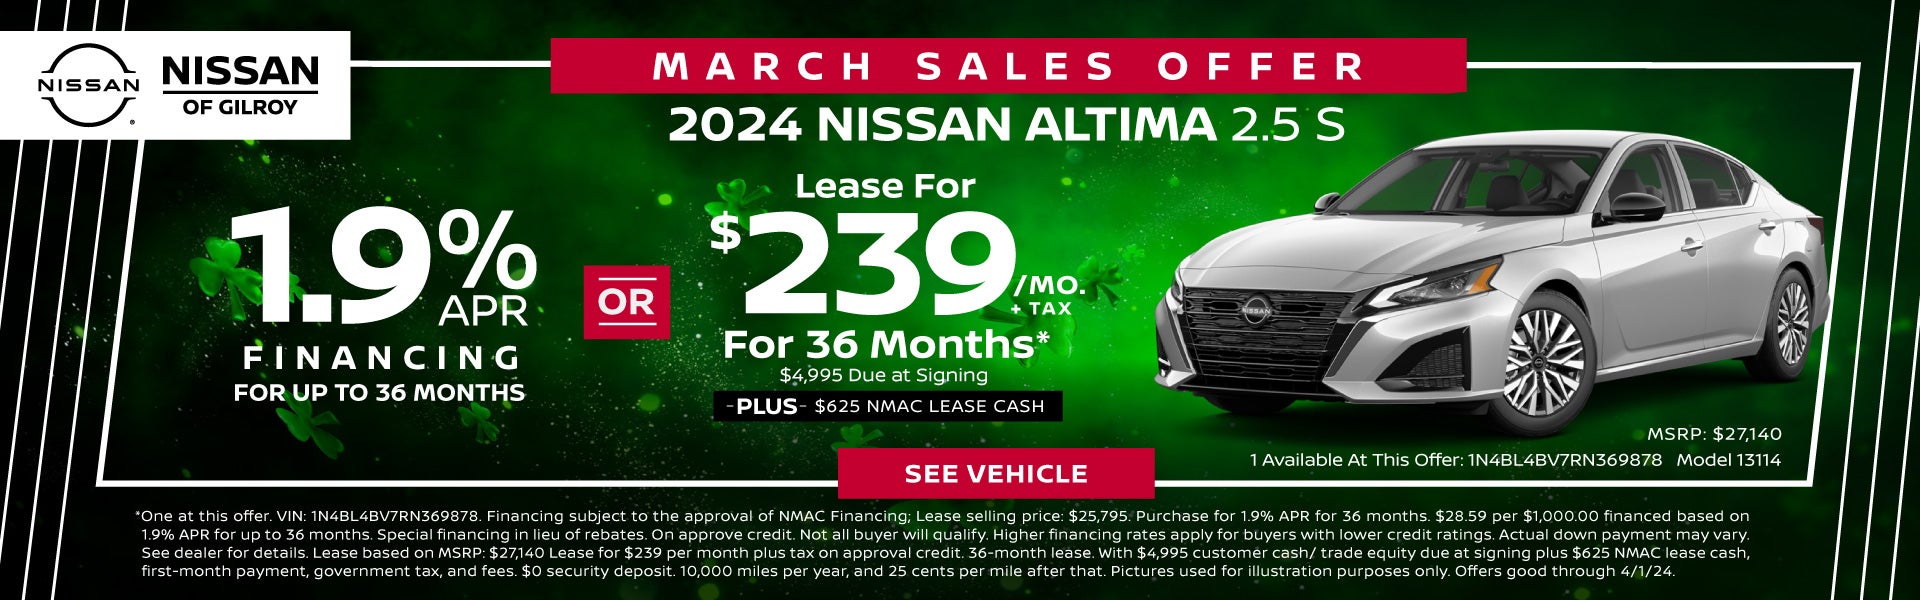 2024 Nissan Altima S March Special!